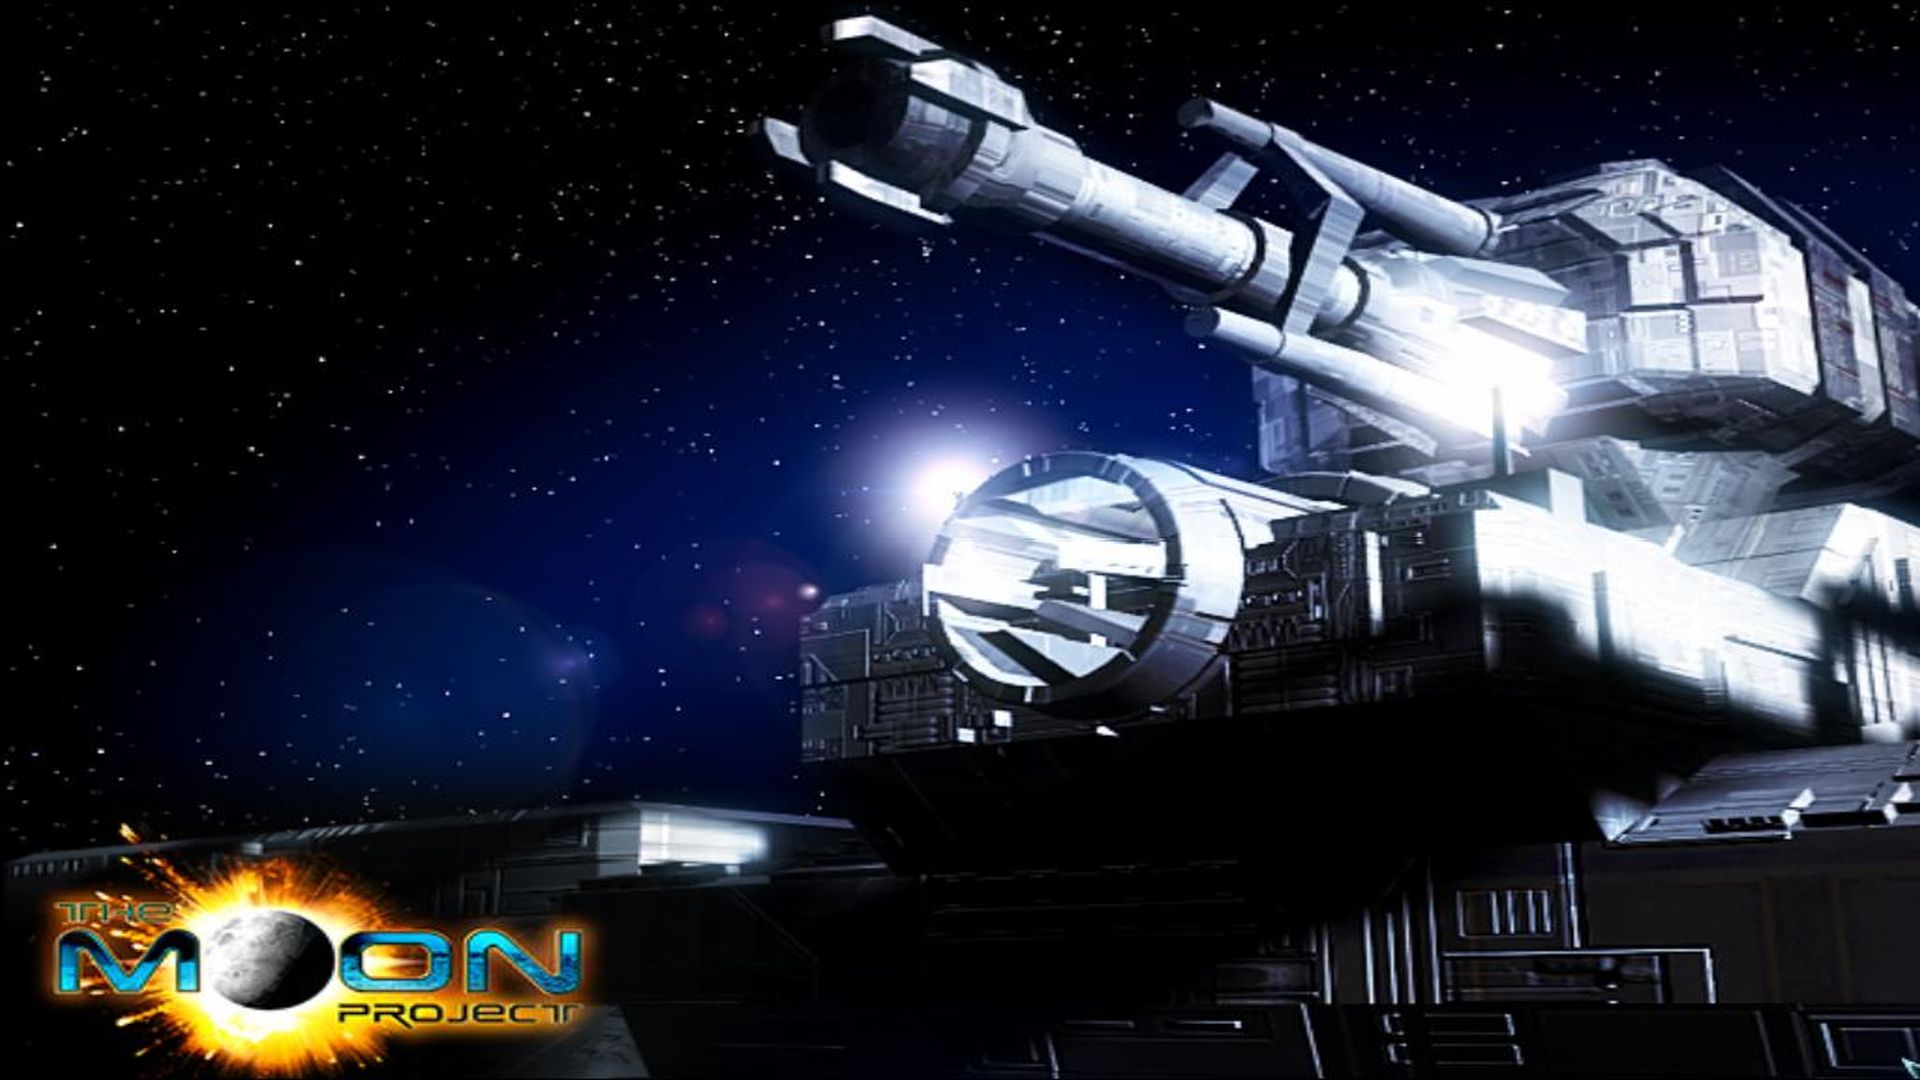 Project lunar. Earth 2150 the Moon Project. Earth 2150 Lunar Corporation. Earth 2150 игра. Project Moon игры.